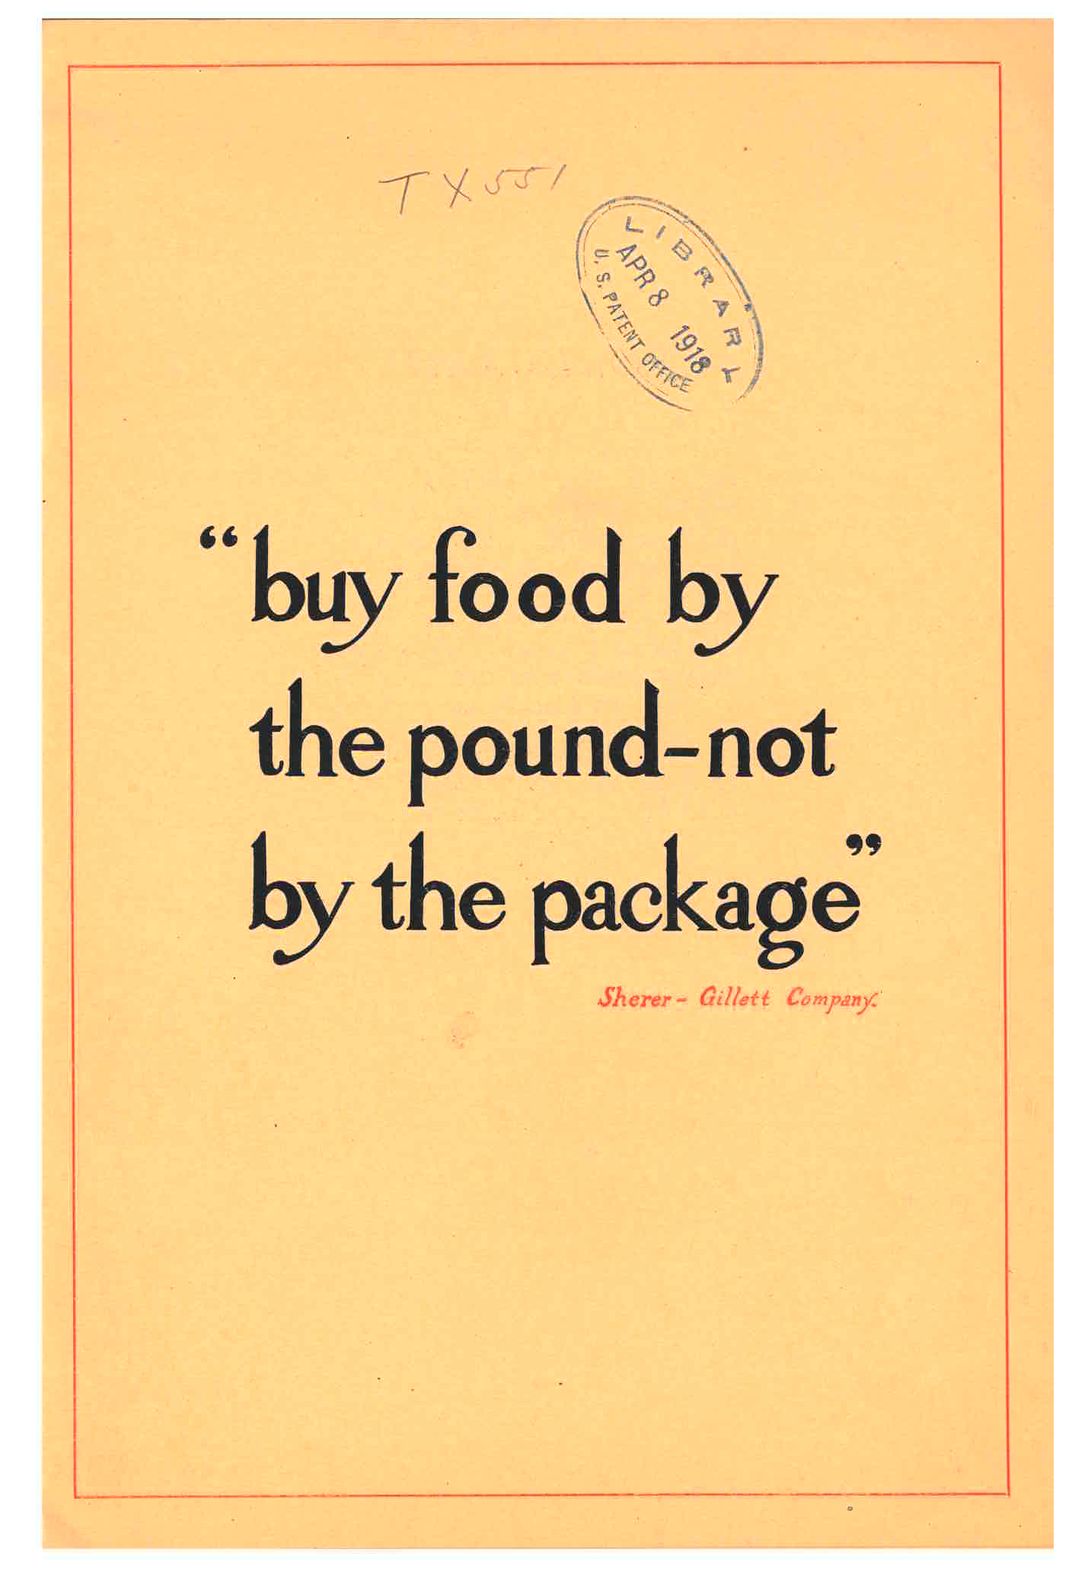 First page of trade literature with words "buy food by the pound-not by the package".